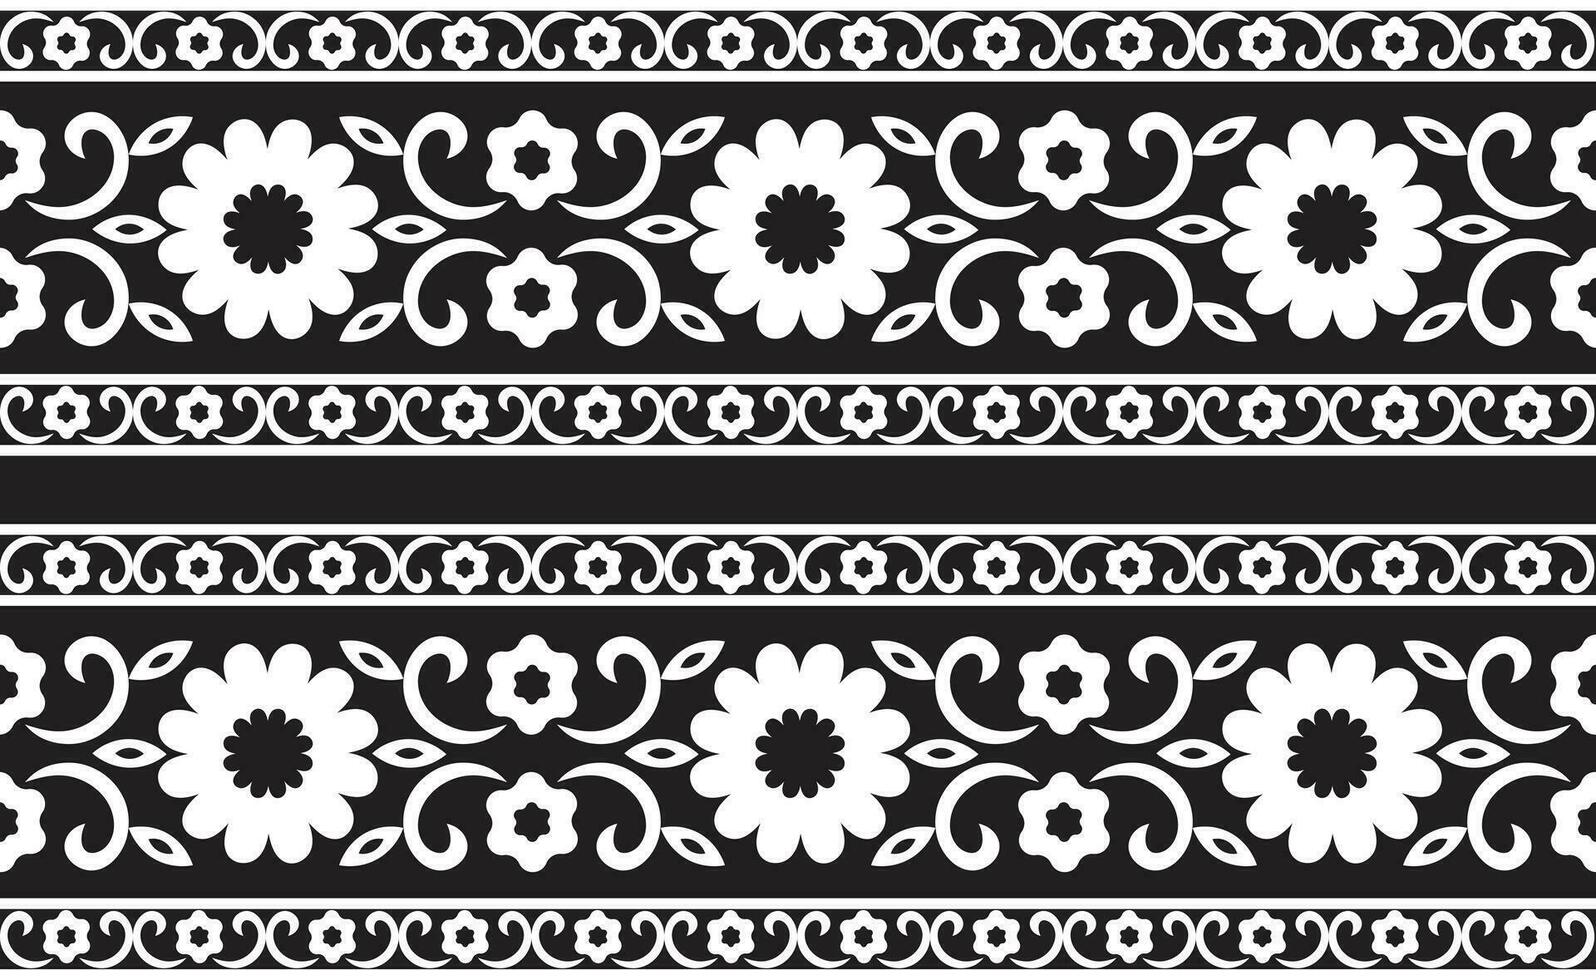 Aztec ethnic patterns are traditional. Geometric oriental seamless pattern. Border decoration. Design for background, wallpaper, vector illustration, textile, carpet, fabric, clothing, and embroidery.